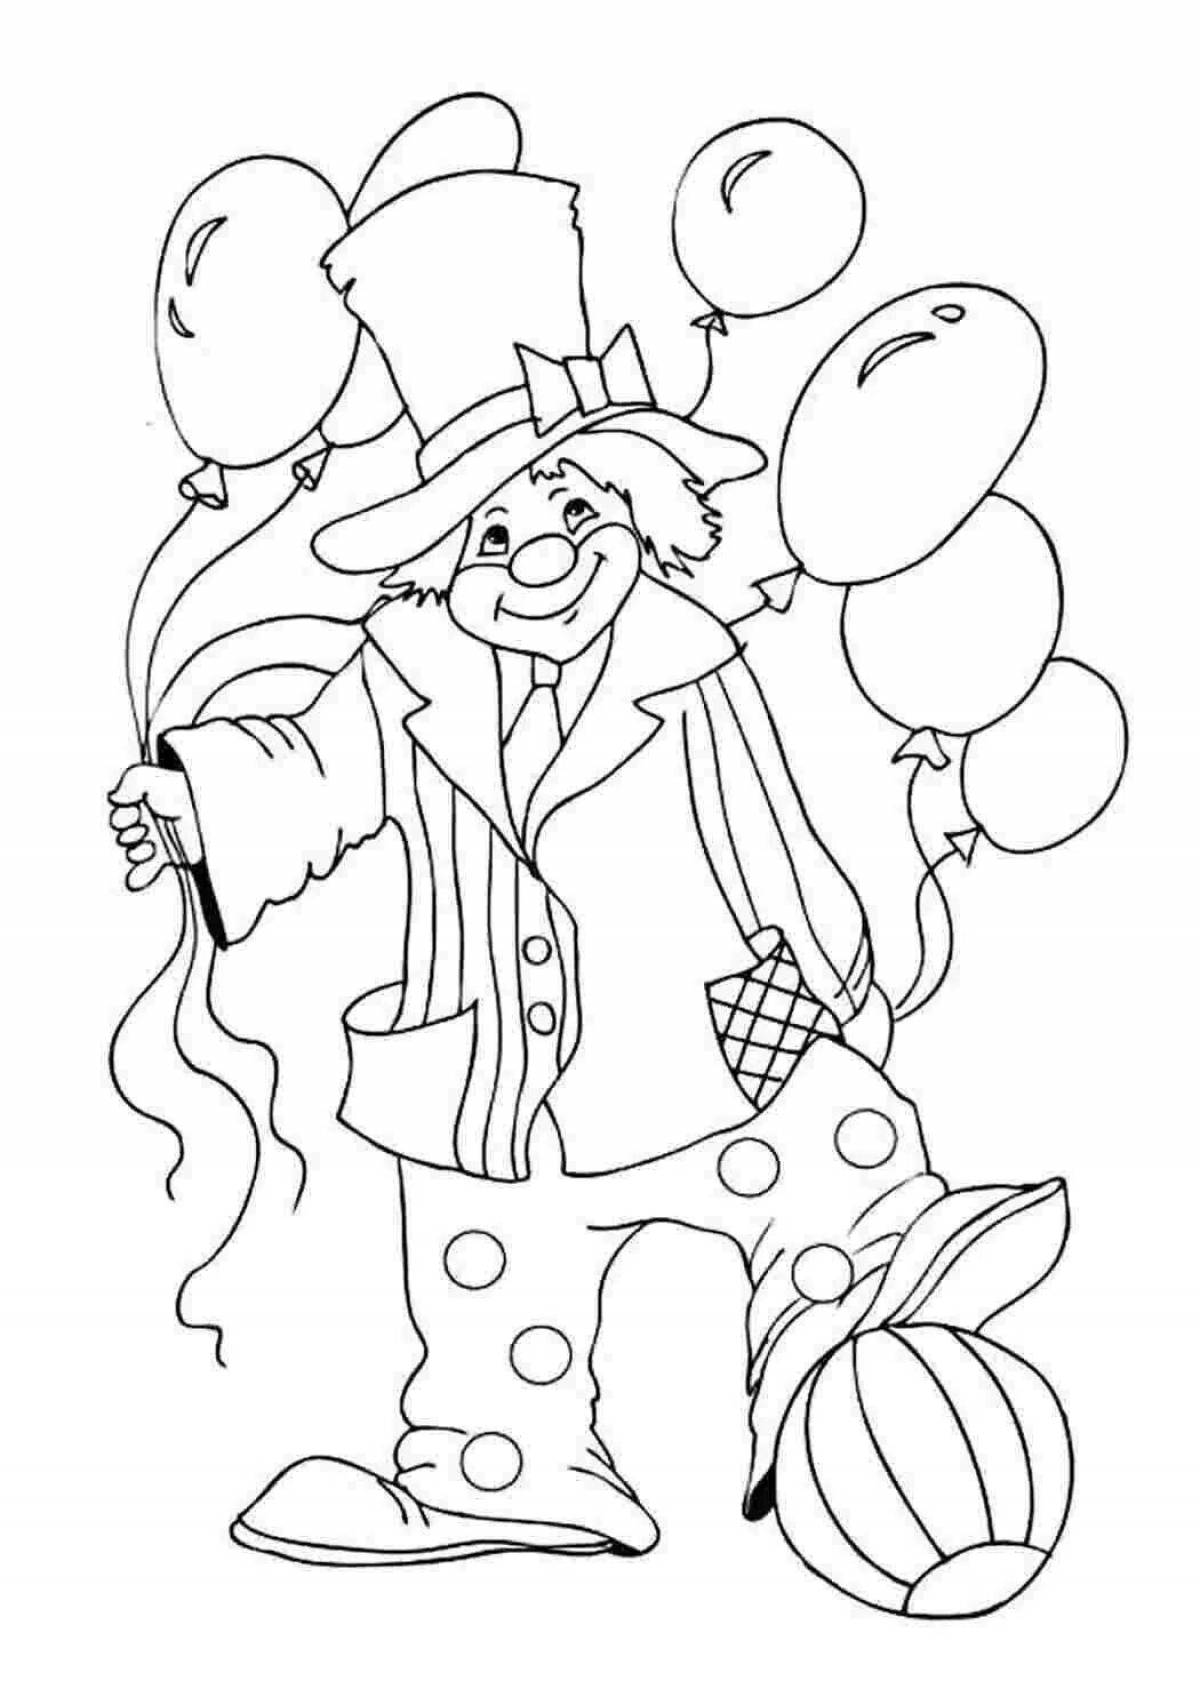 Live clown coloring book for kids